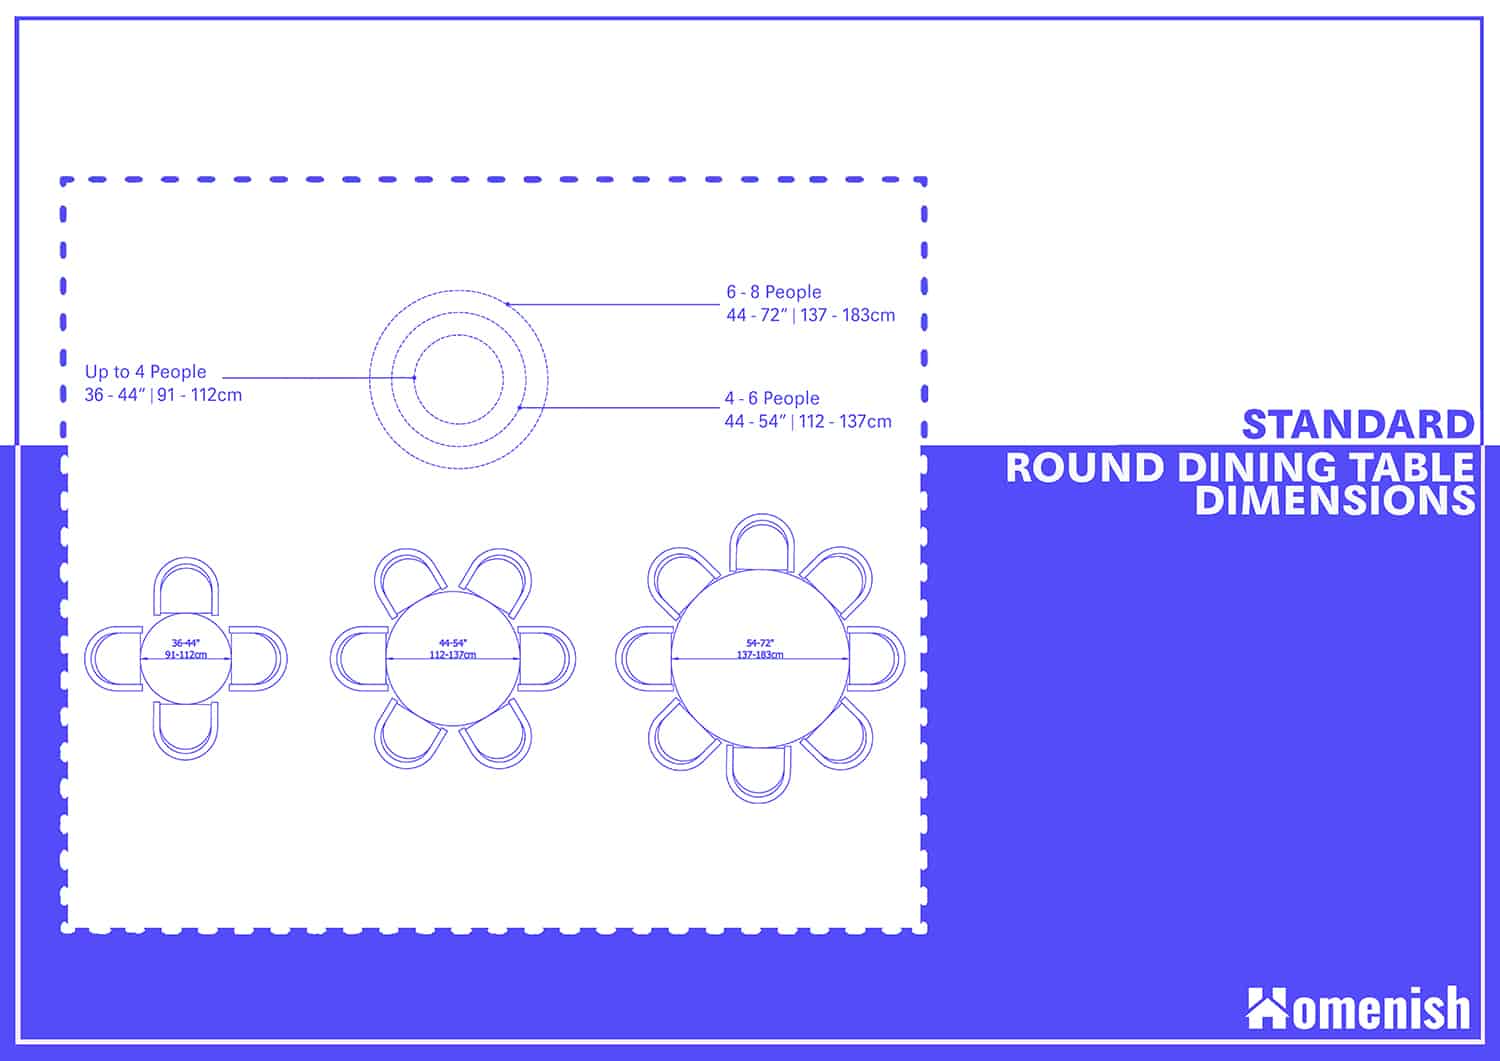 Standard Round Dining Table Dimensions